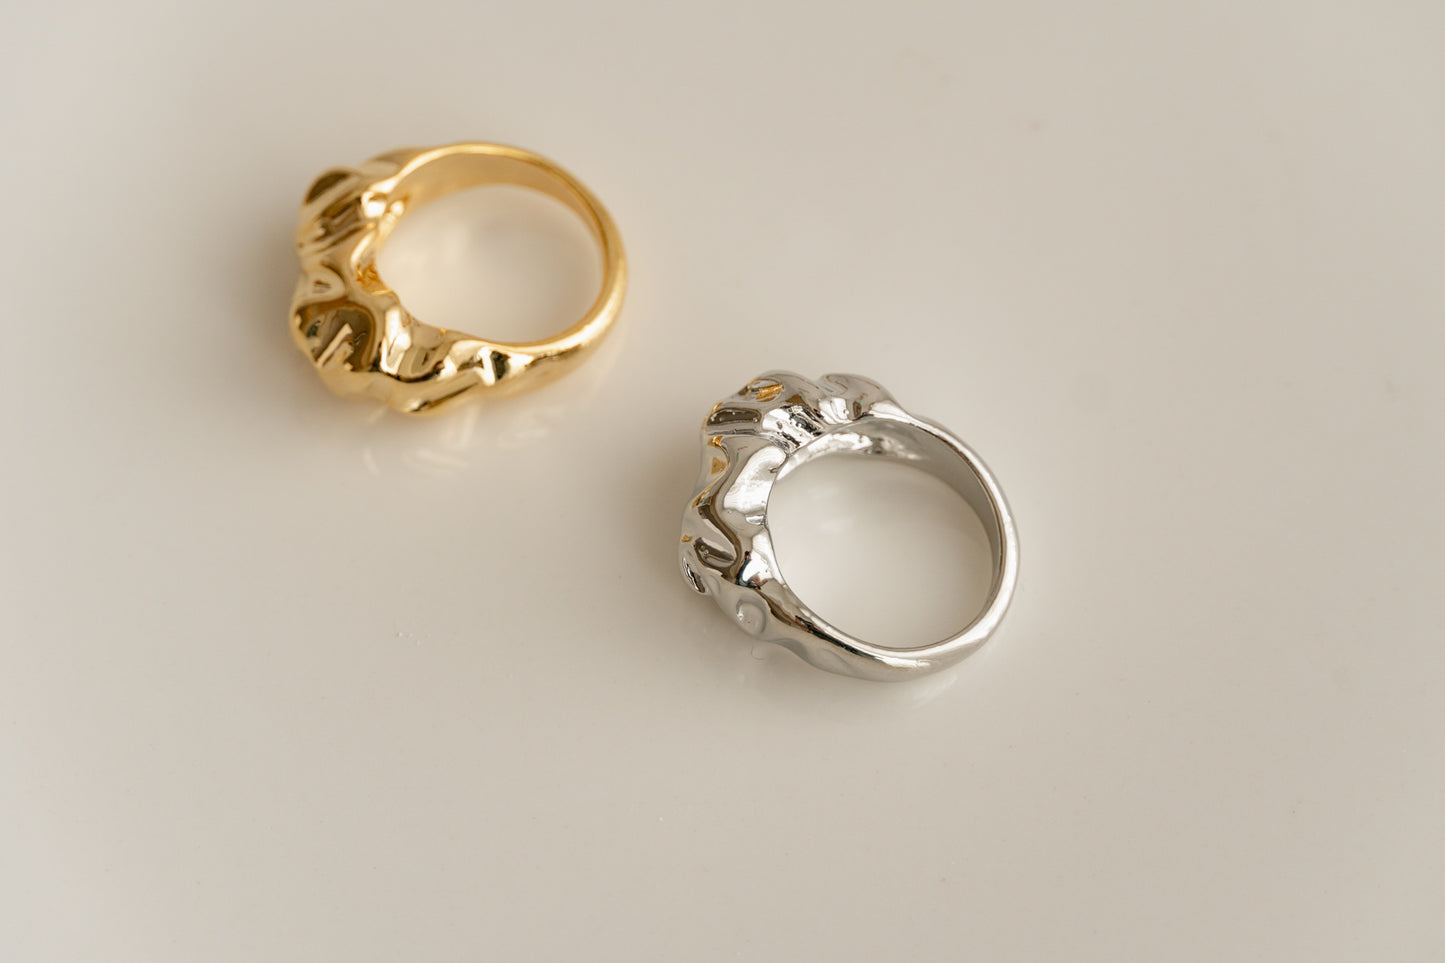 Gold Abstract Ring